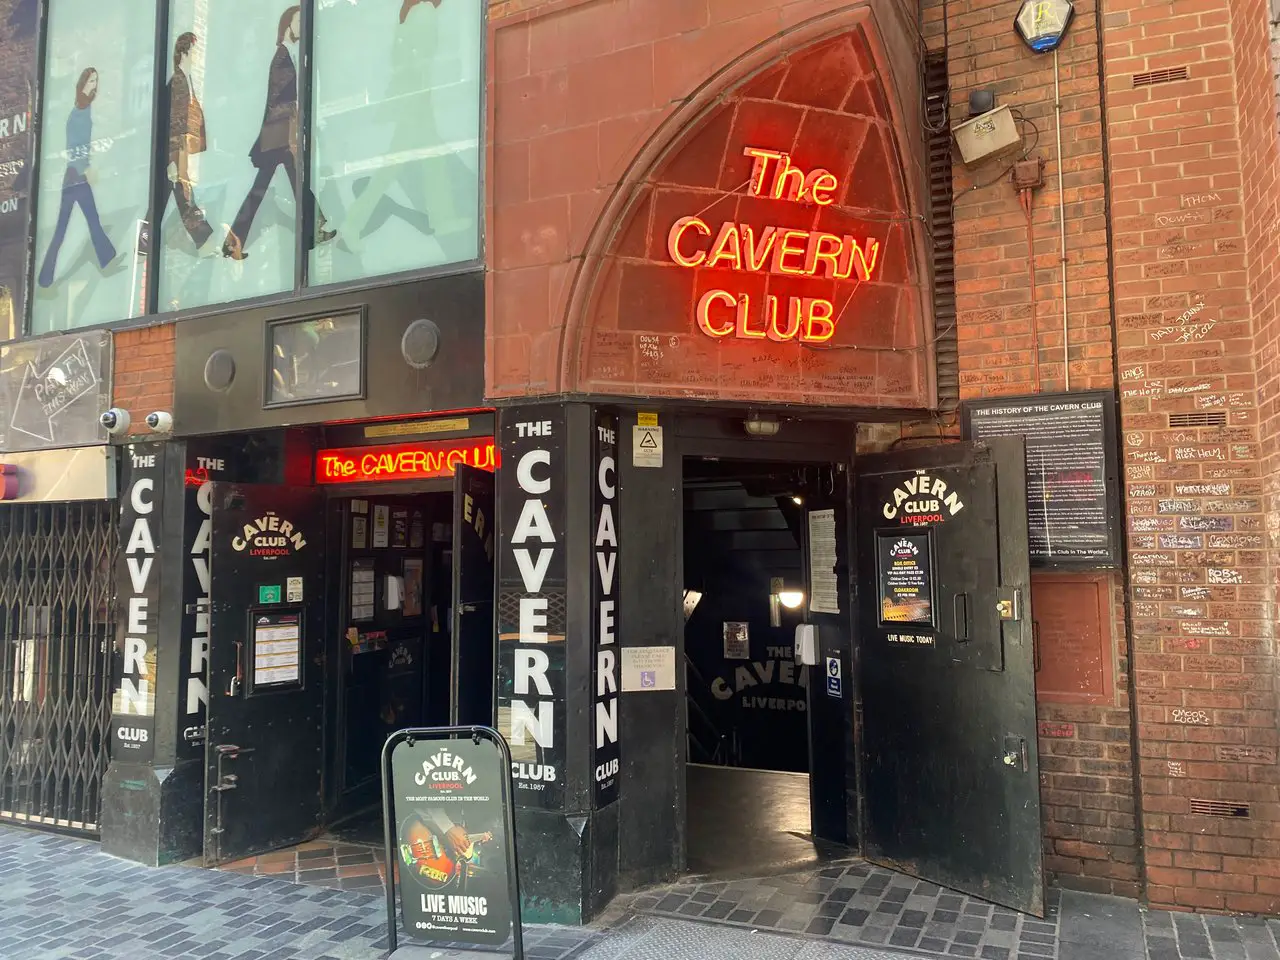 The entrance to the Cavern Club on Mathew Street Liverpool